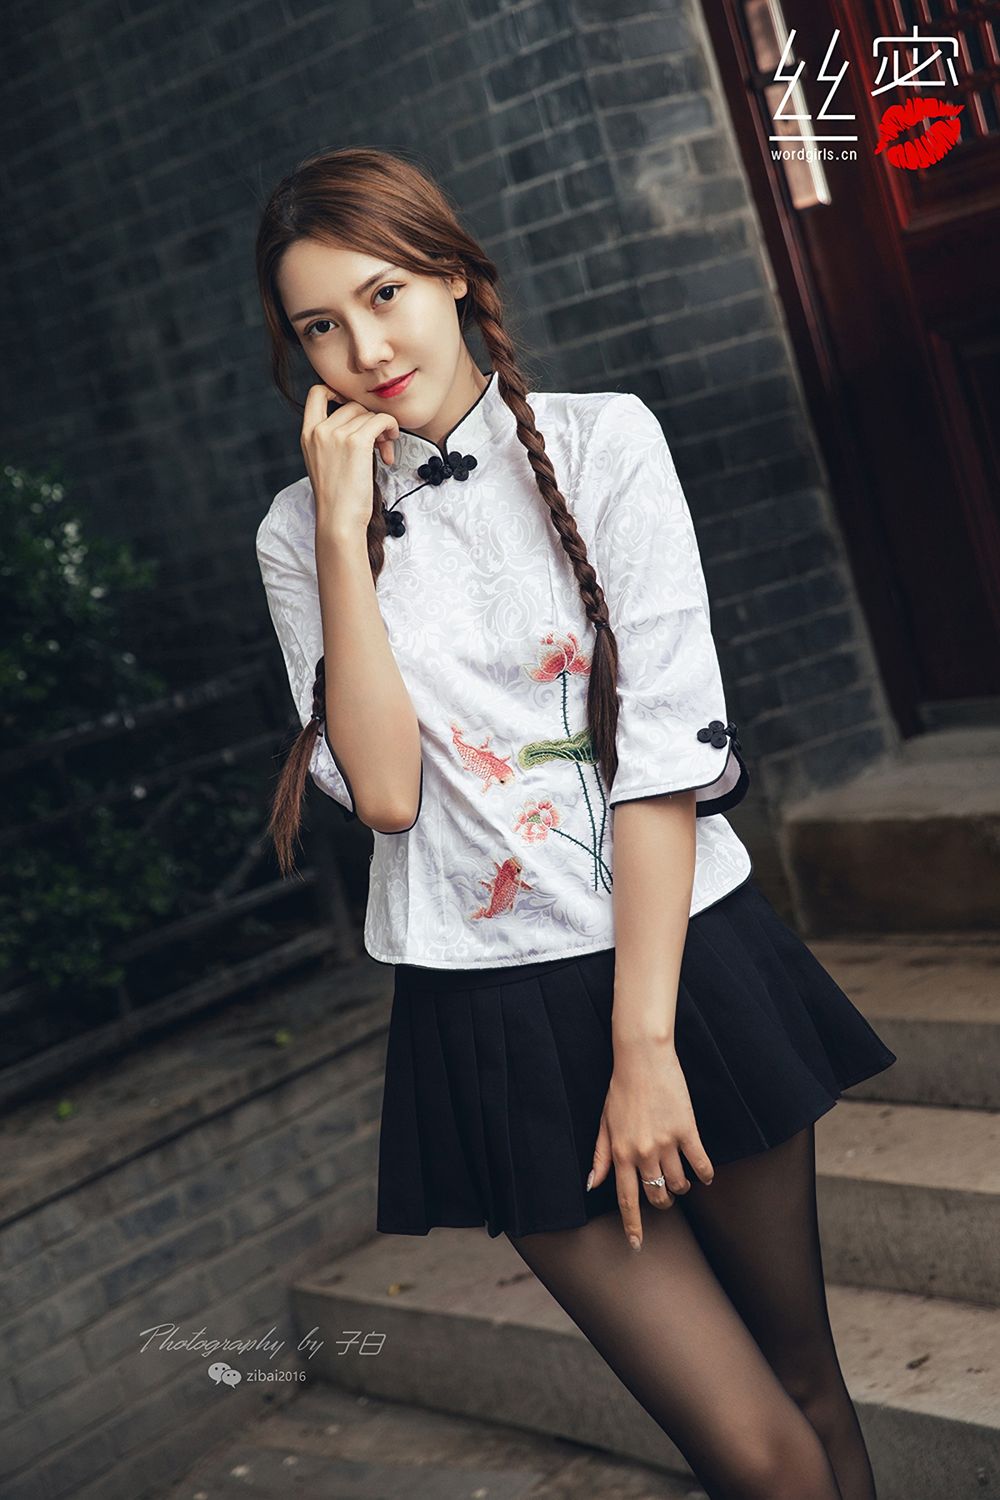 [TouTiao Girls] The black silk chick in the alley